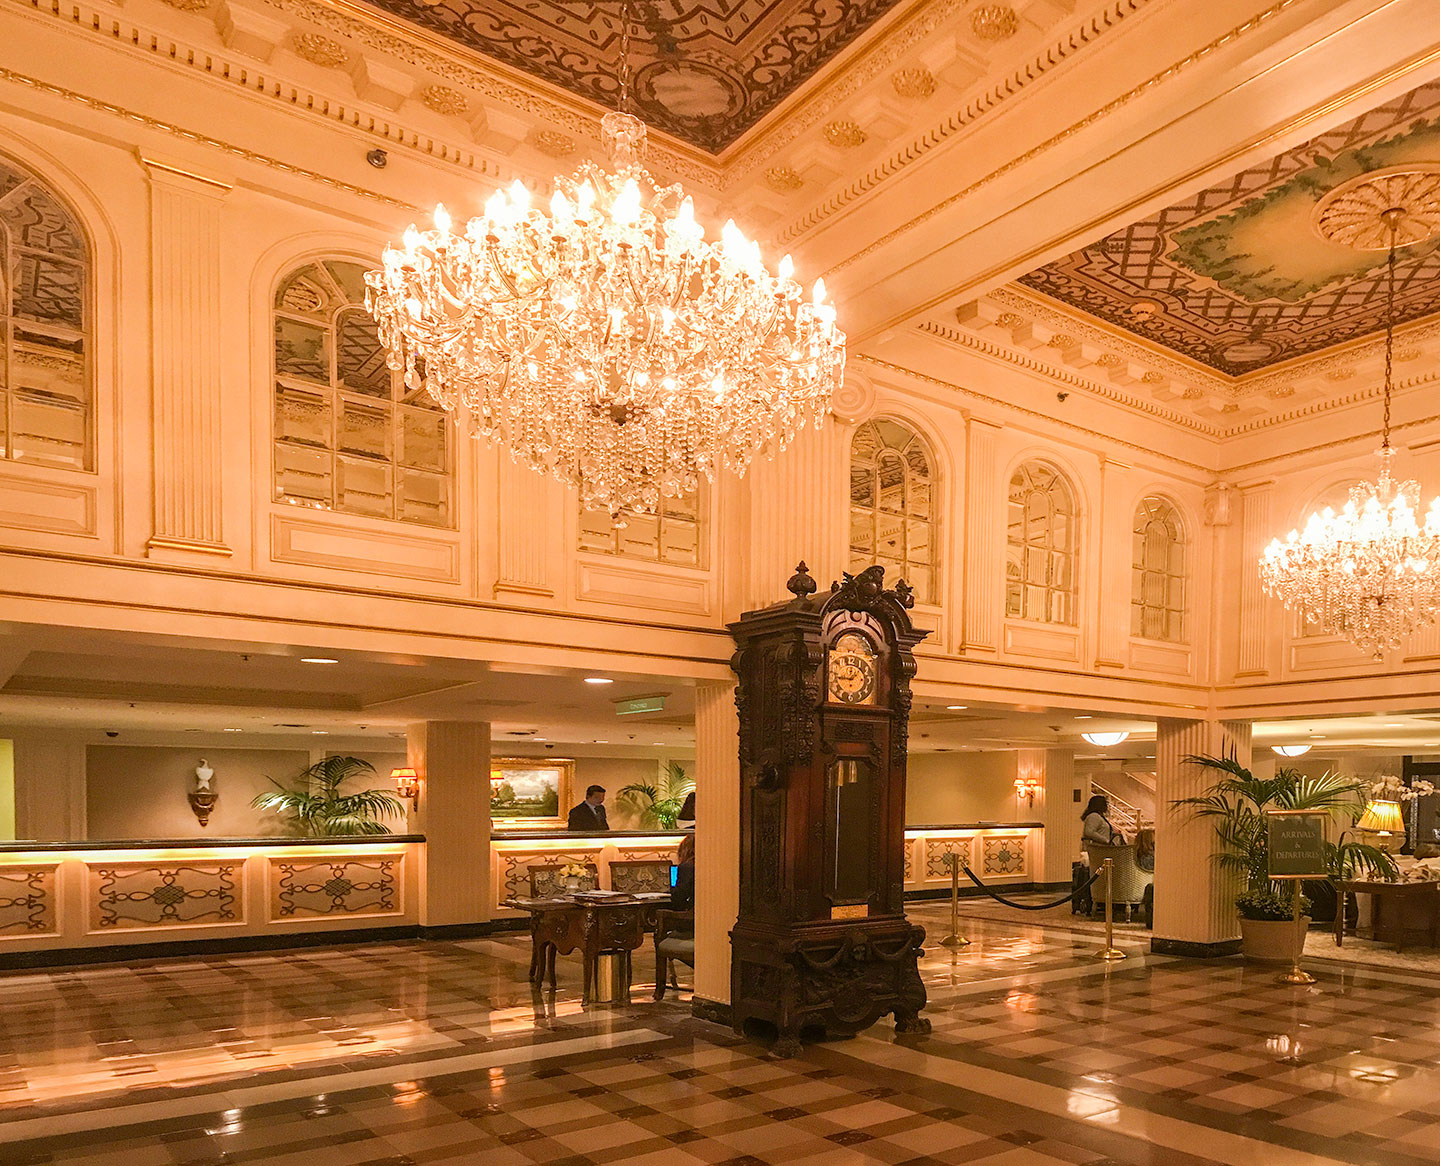 The lobby of the Monteleone Hotel, a luxury hotel in the French Quarter of New Orleans